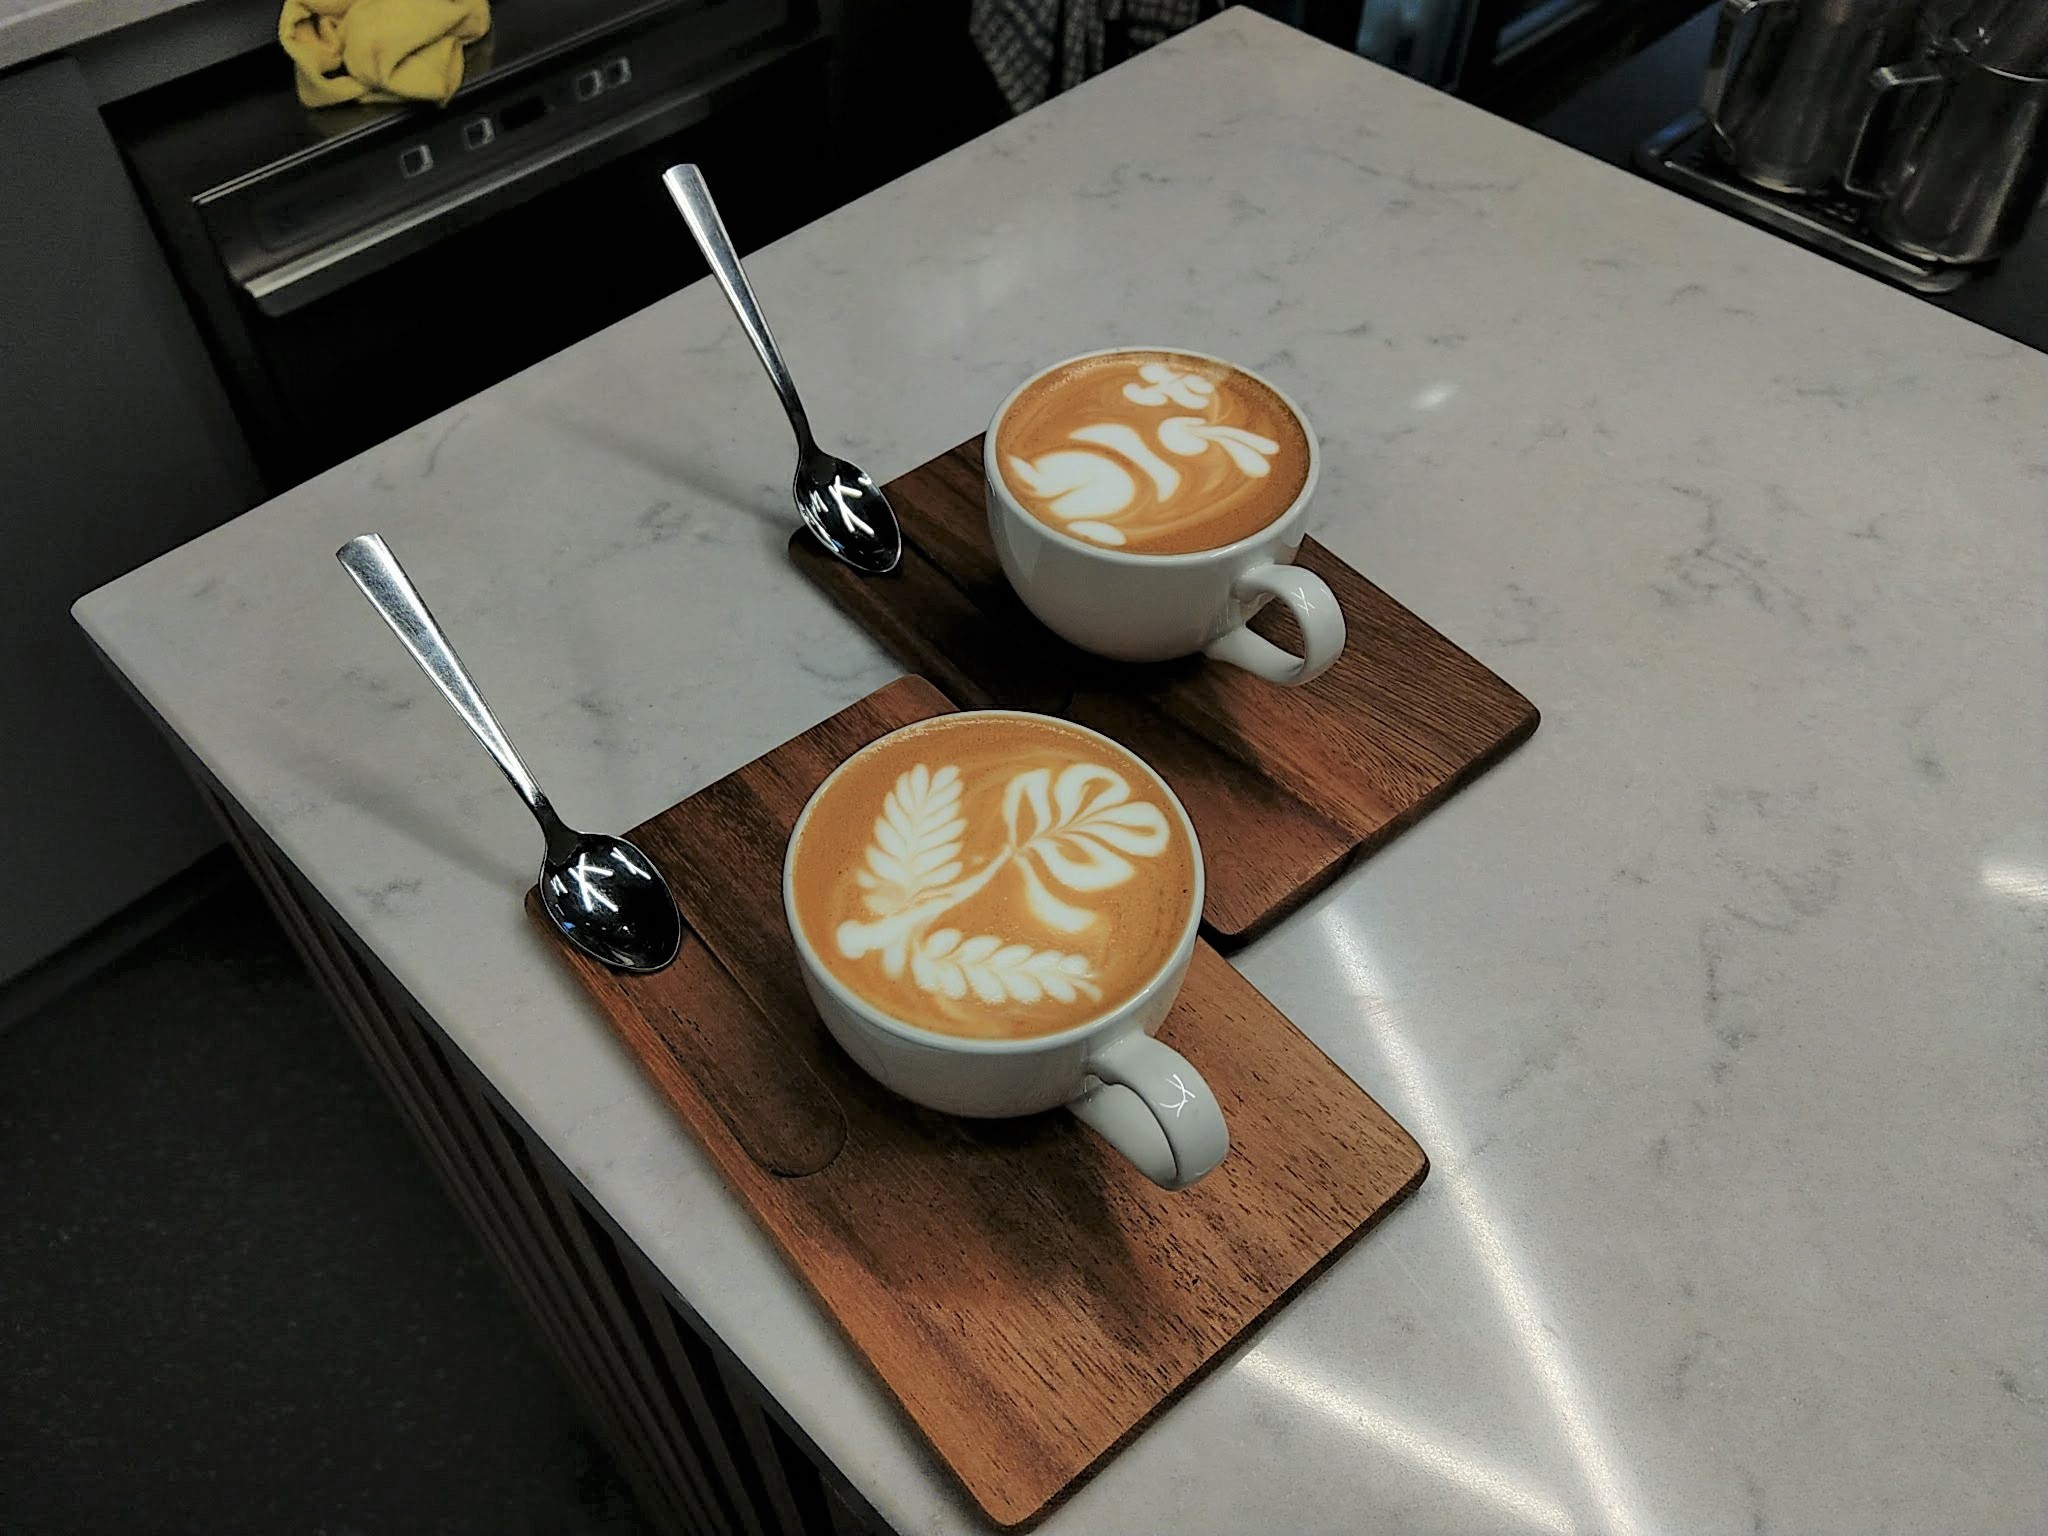 What's Brewing in Dublin: The Coffee News Roundup - June 21st